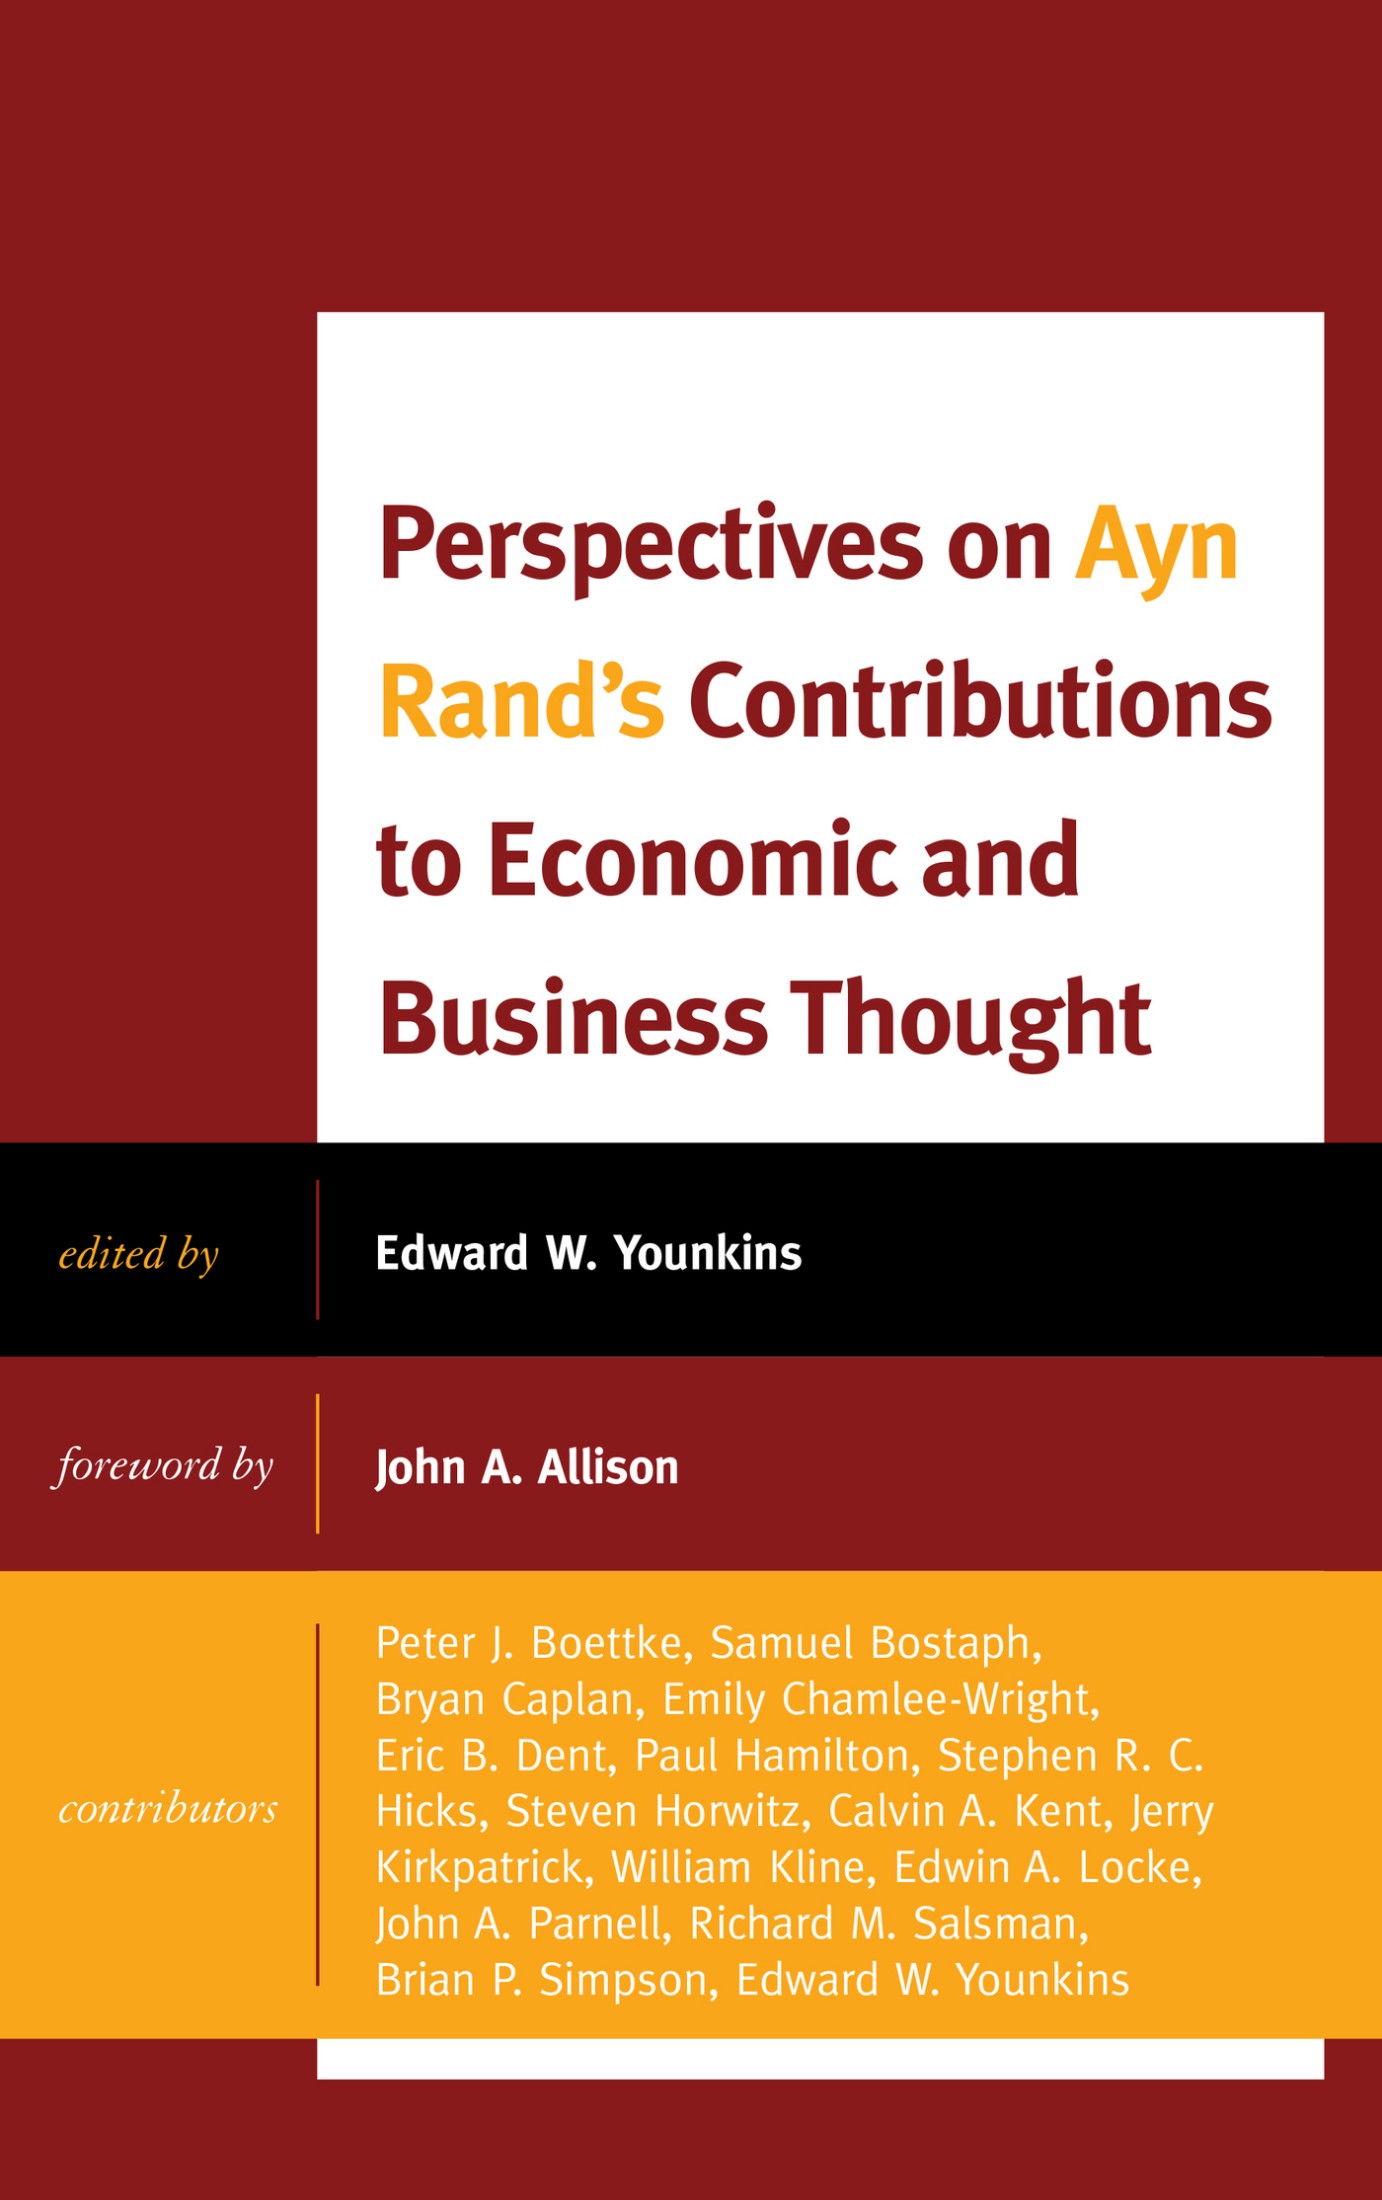 Perspectives on Ayn Rand's Contributions to Economic and Business Thought